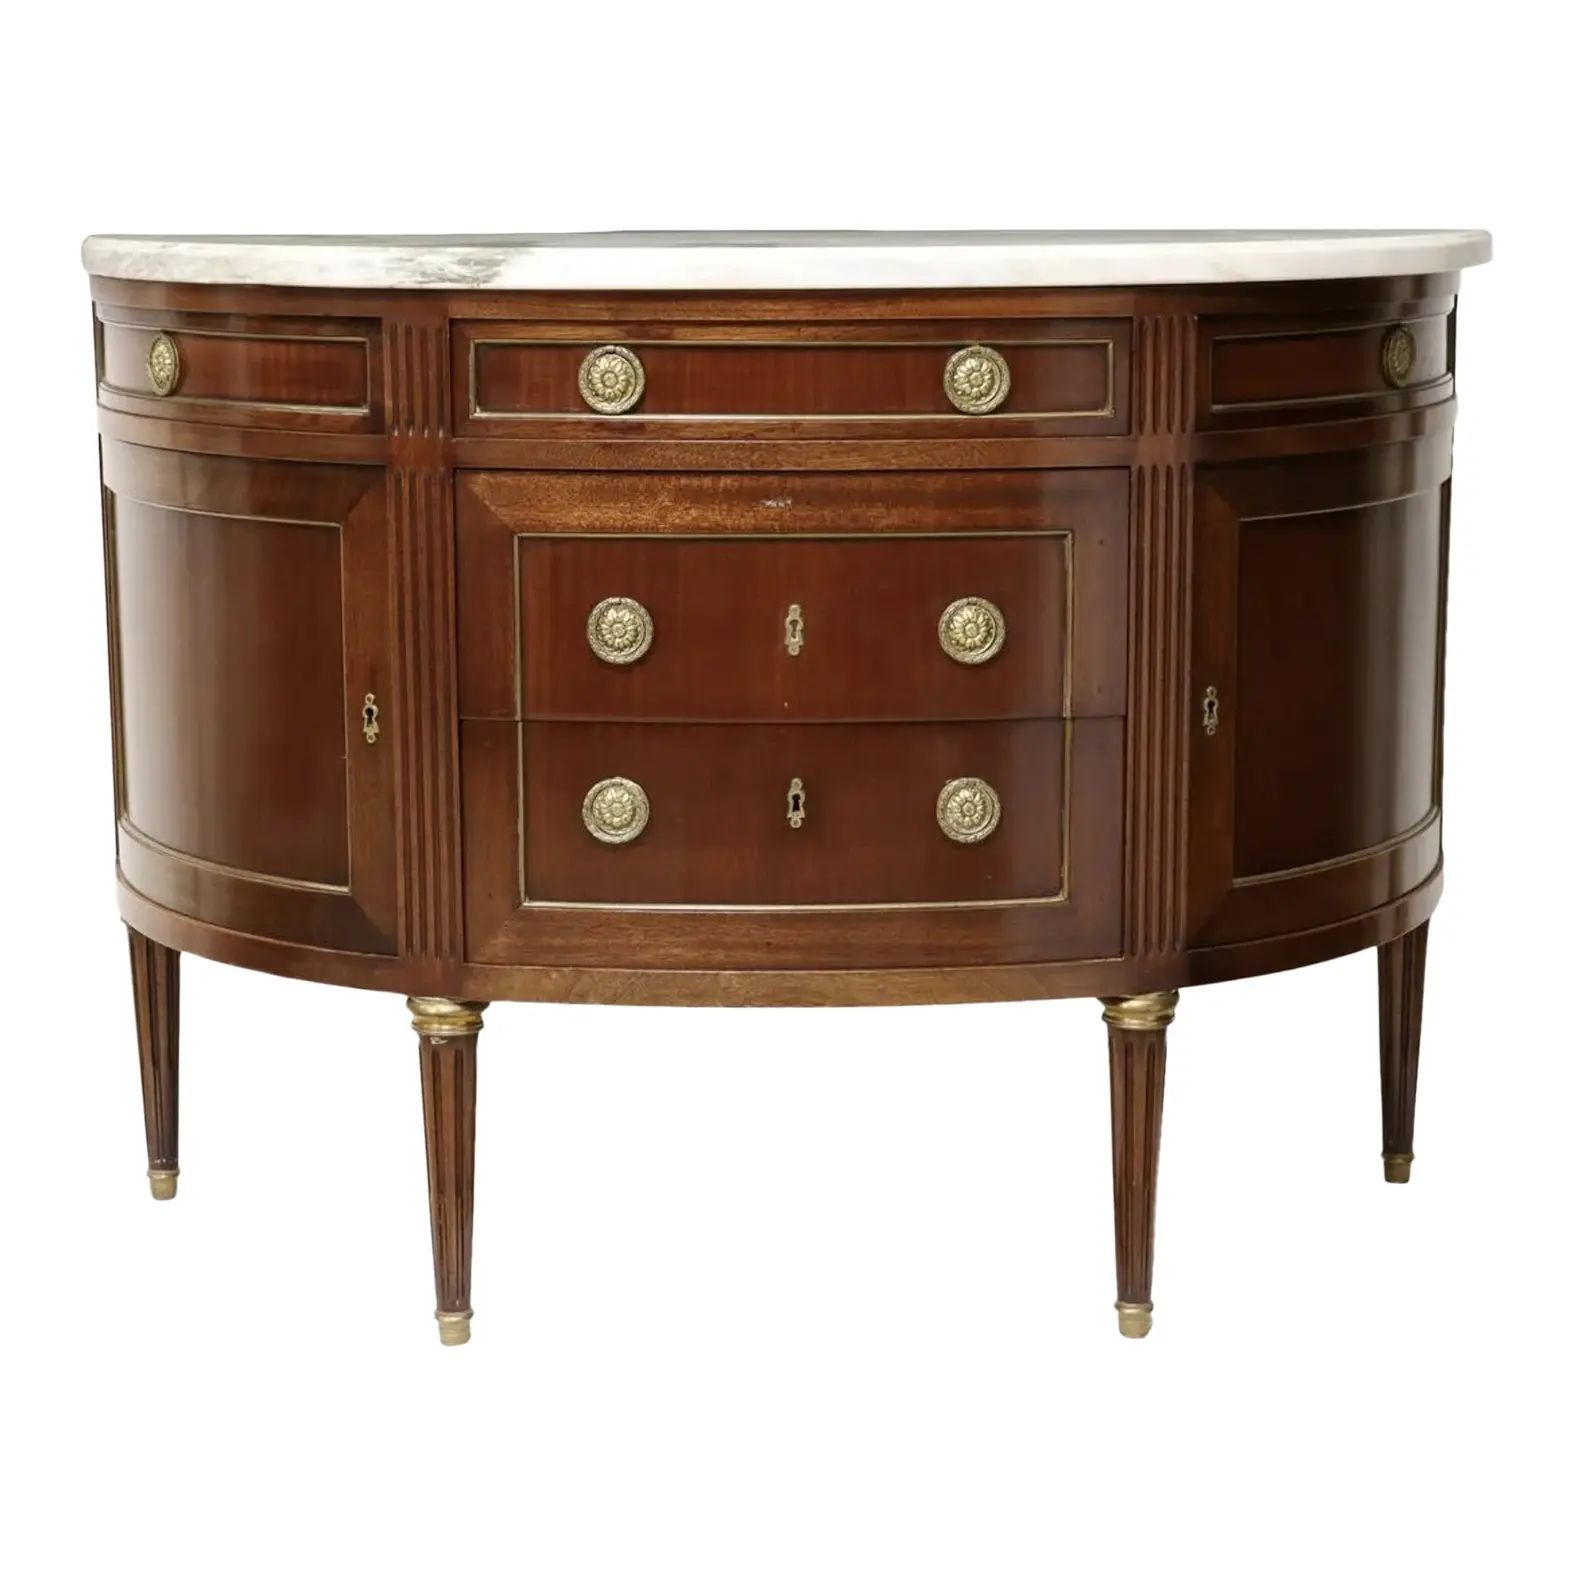 French Louis XVI Style Demilune Marble Top Commode - 20th C | Chairish